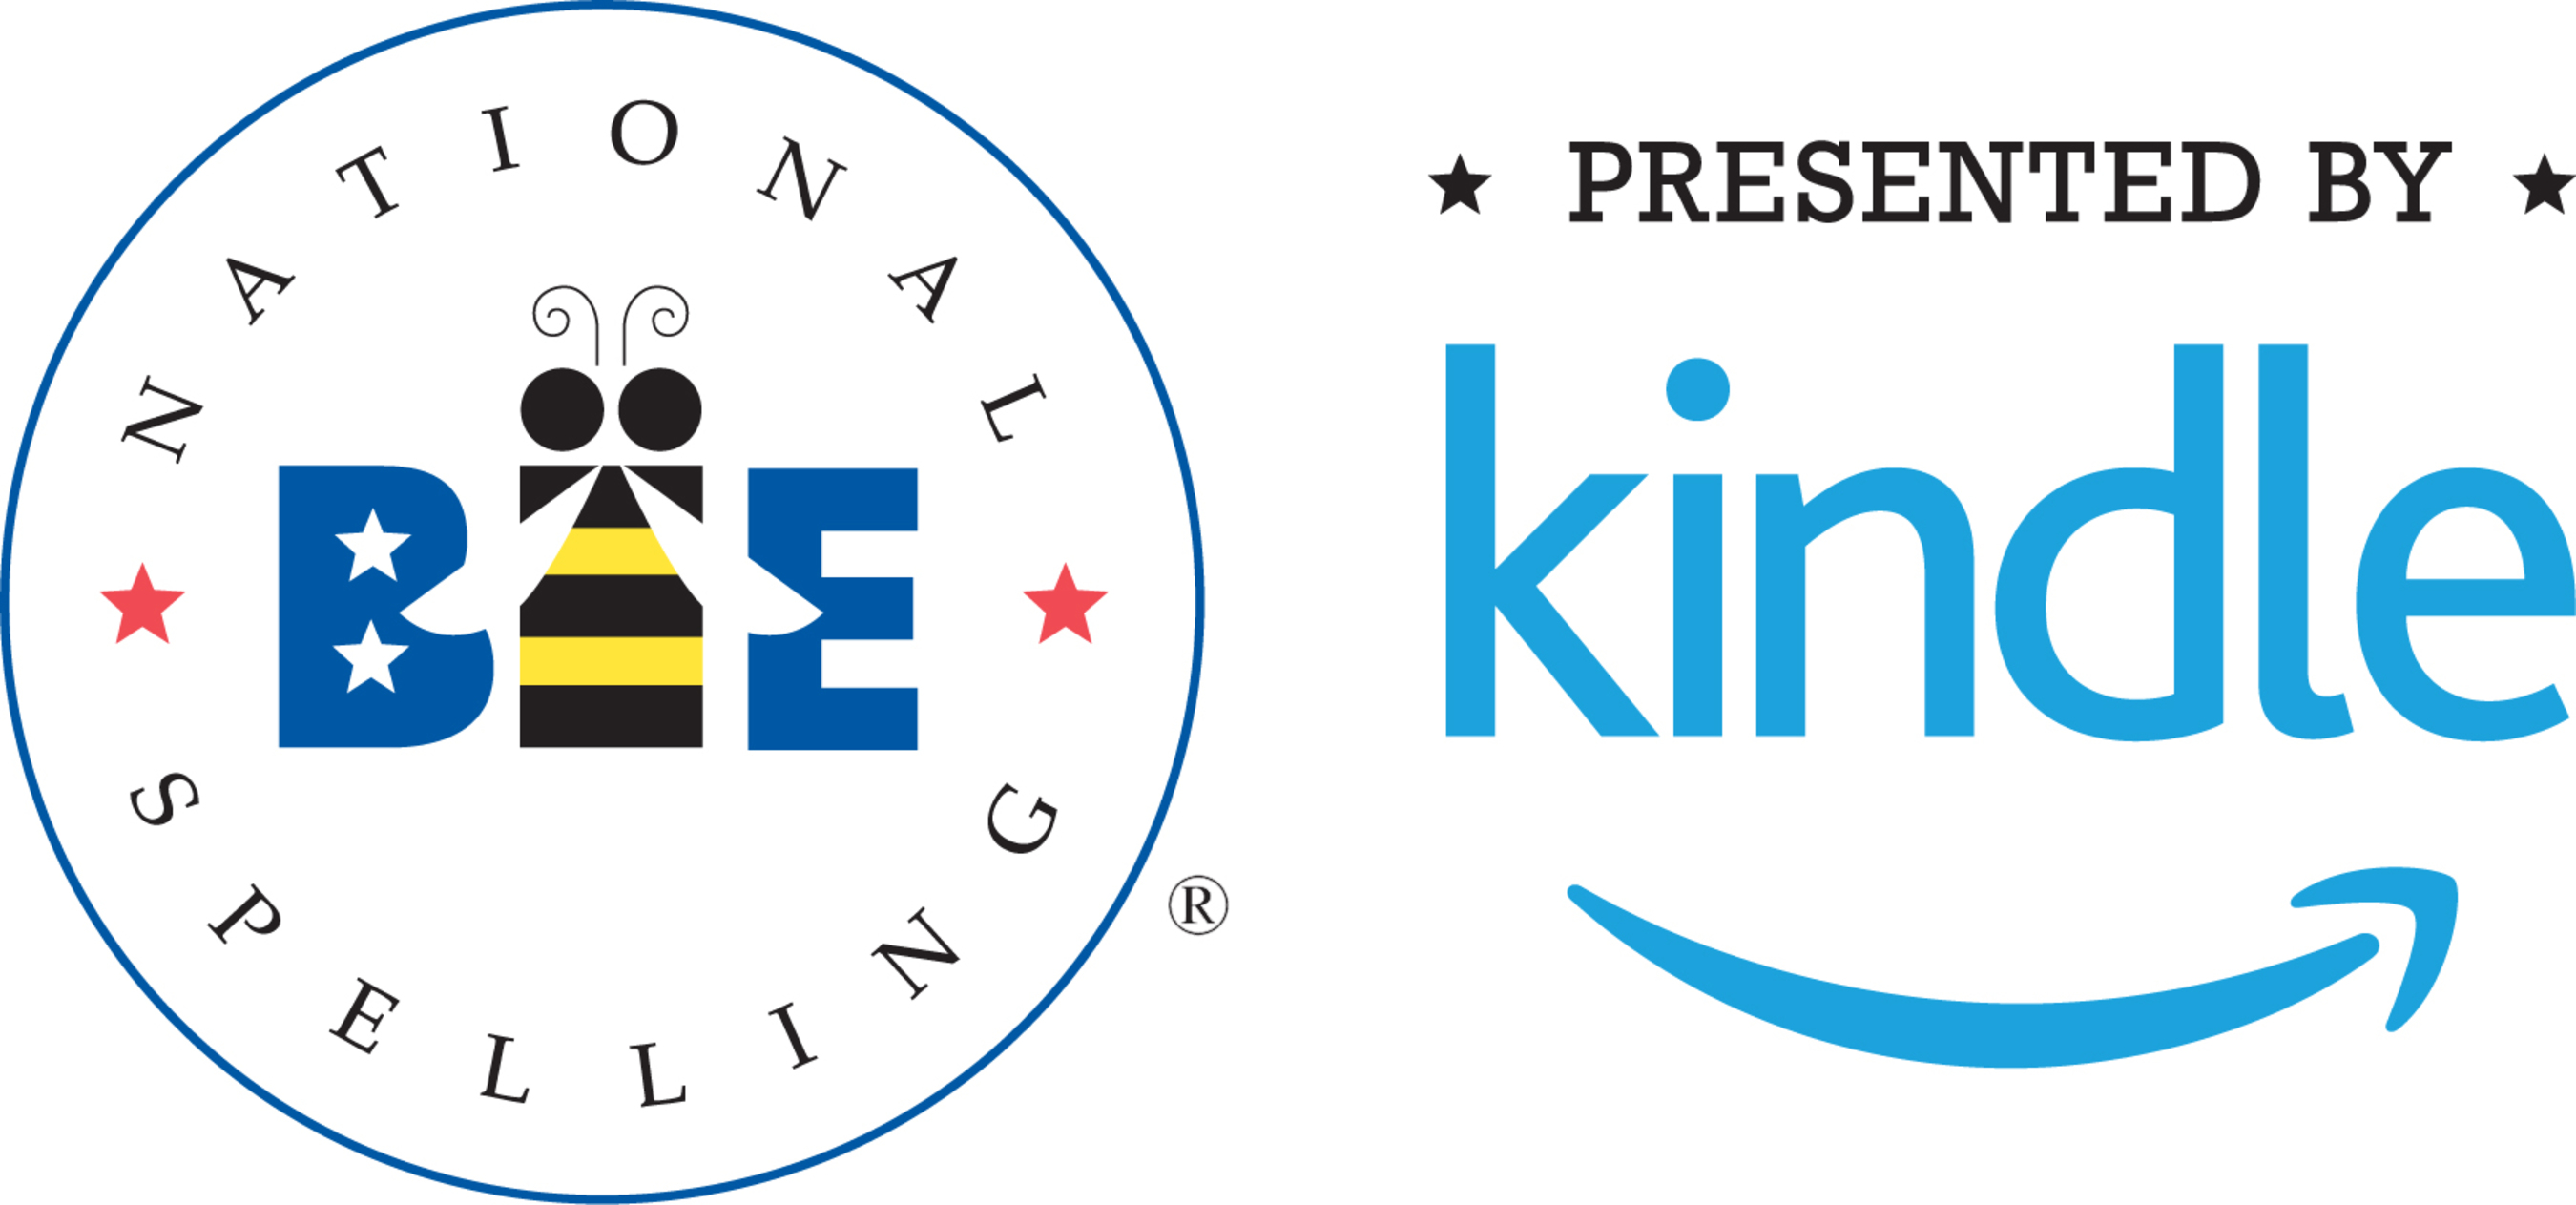 Kindle announced as presenting sponsor for the Scripps National Spelling Bee